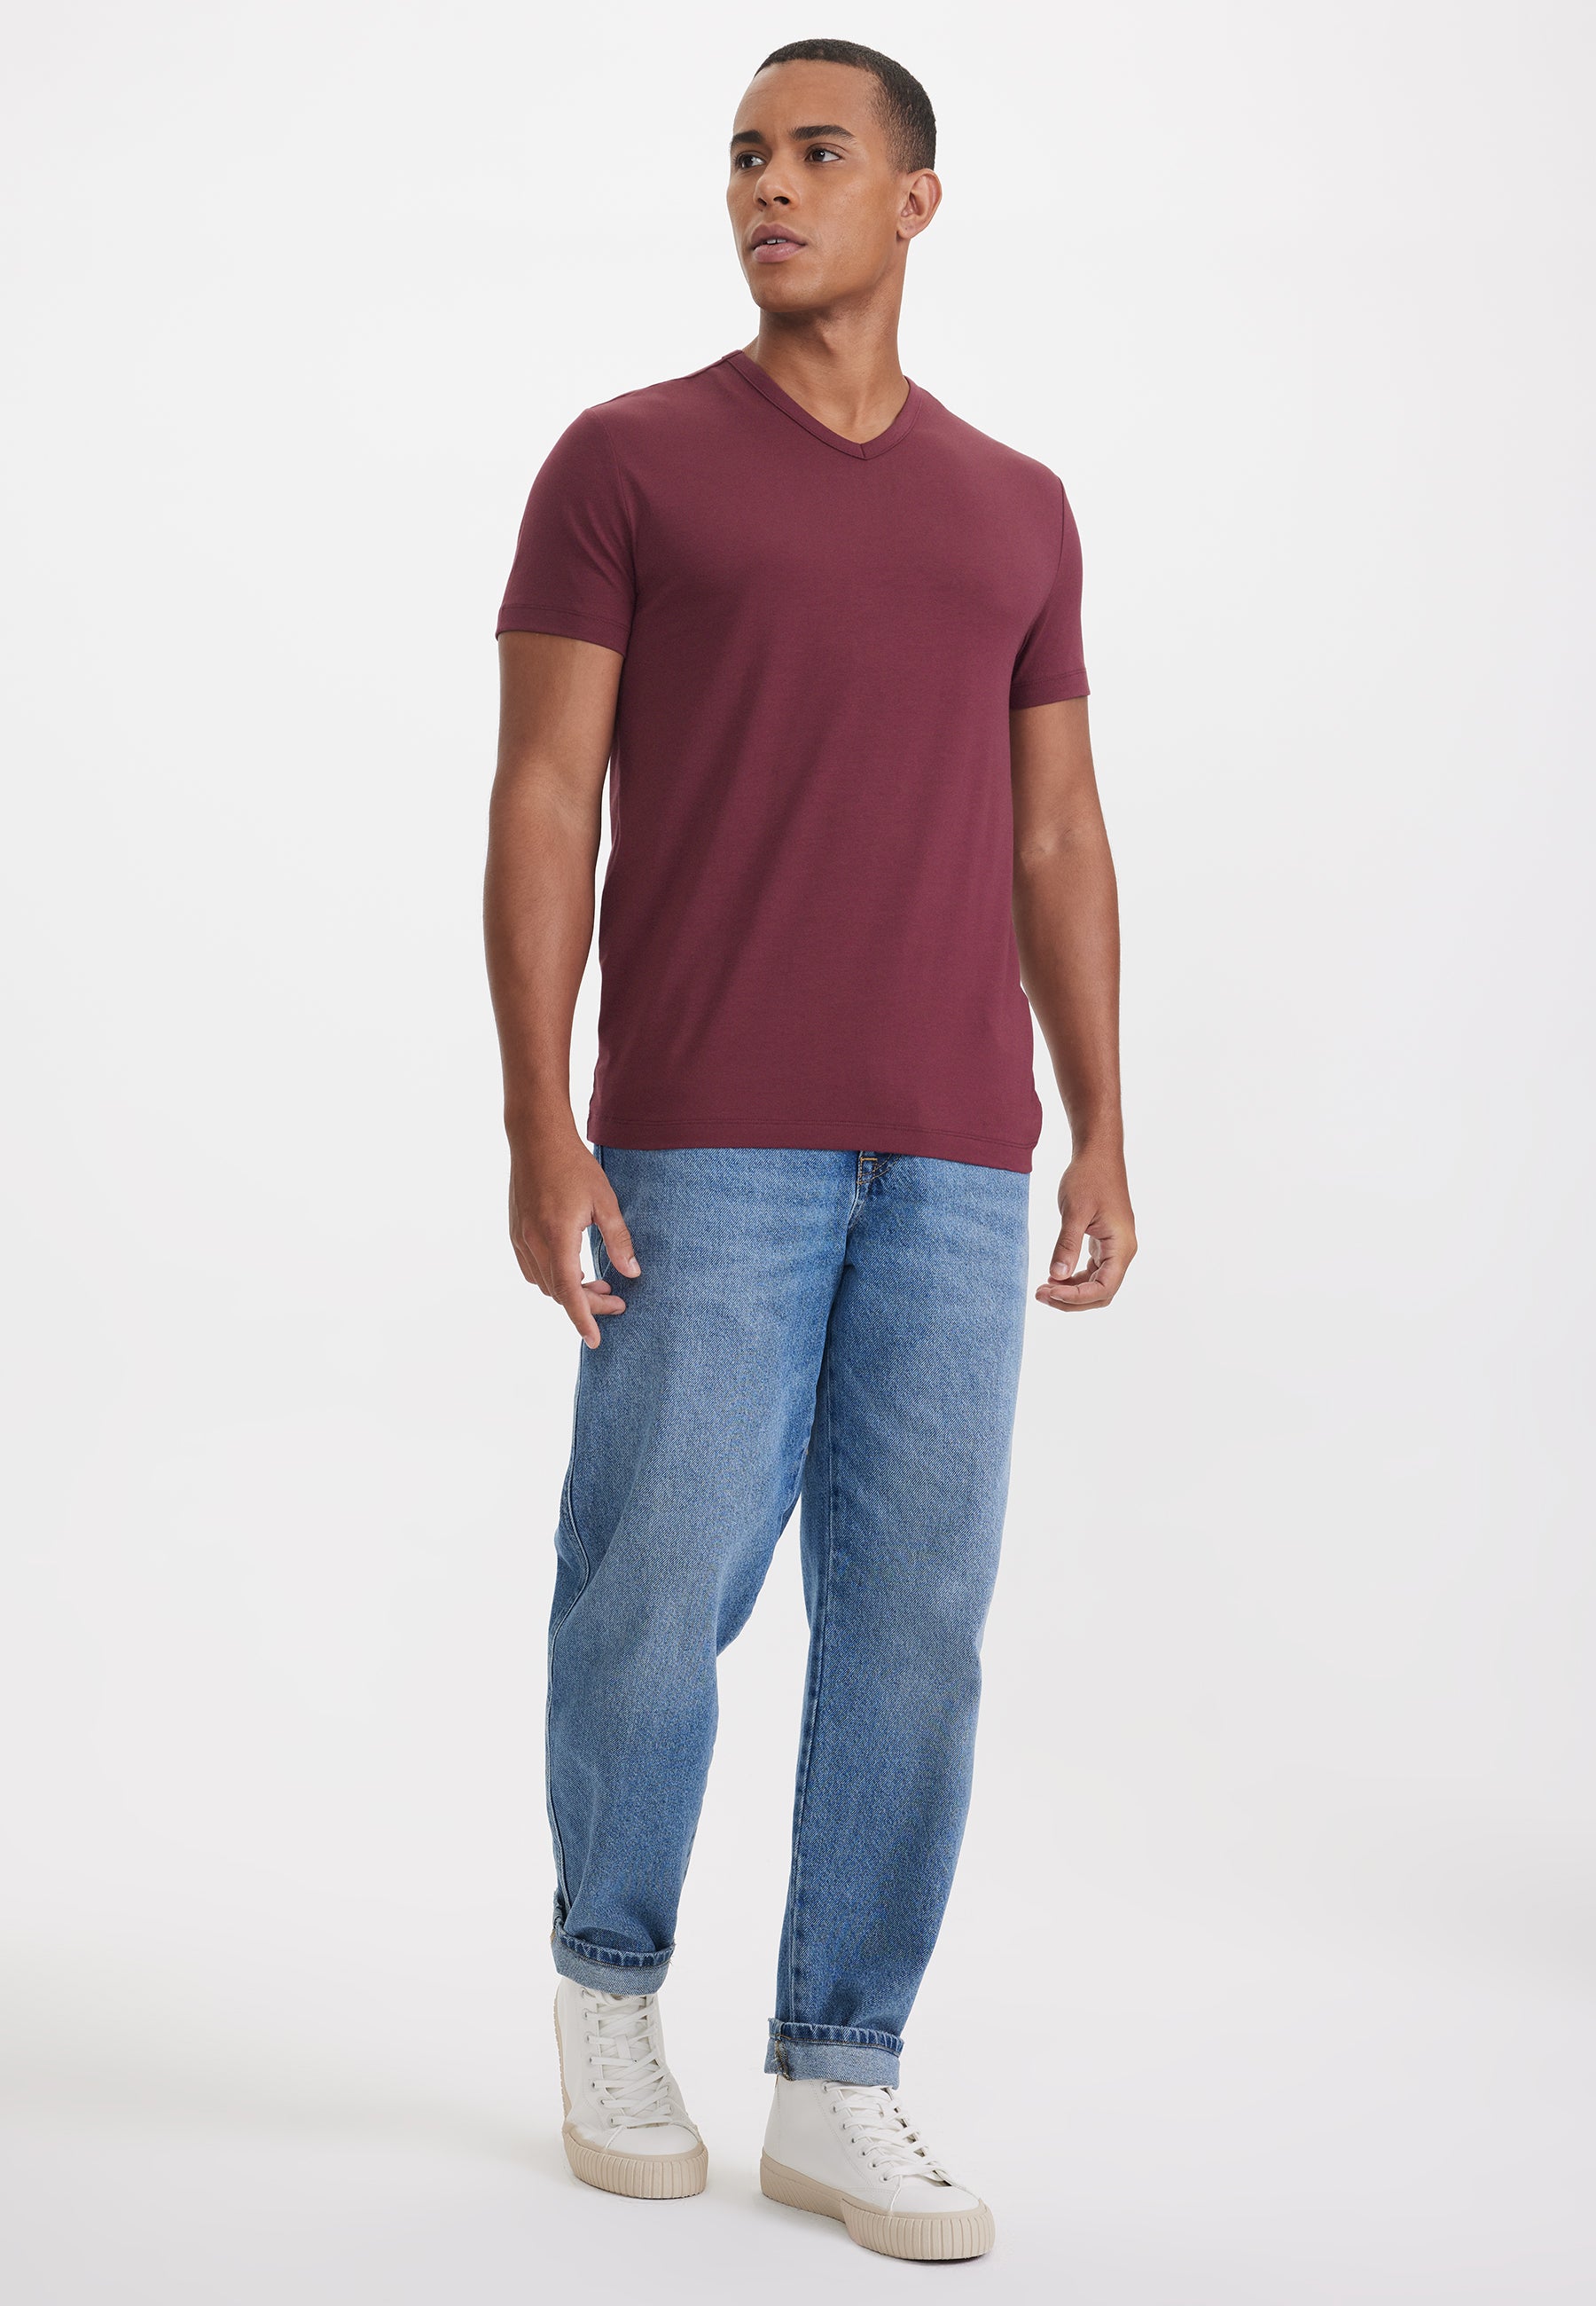 THEO V-NECK TEE in Bordeaux